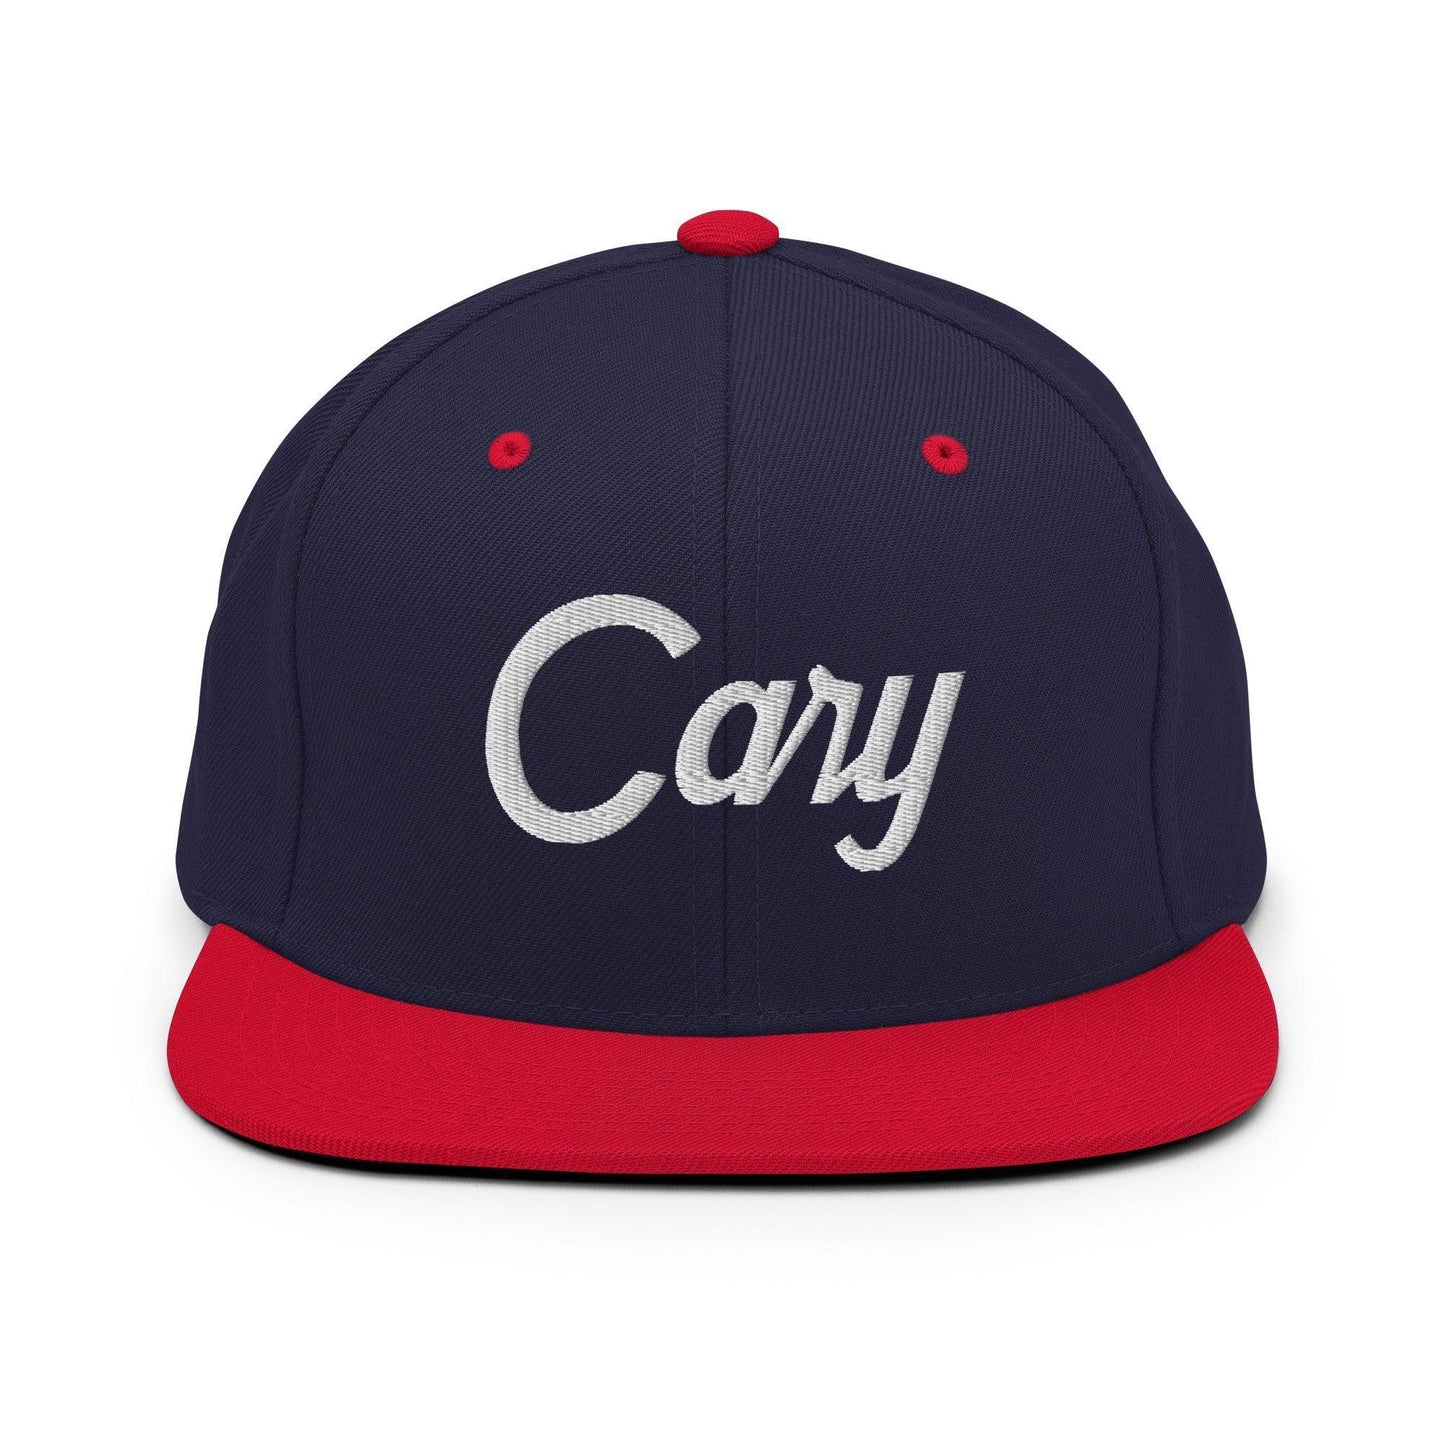 Cary Script Snapback Hat Navy/ Red